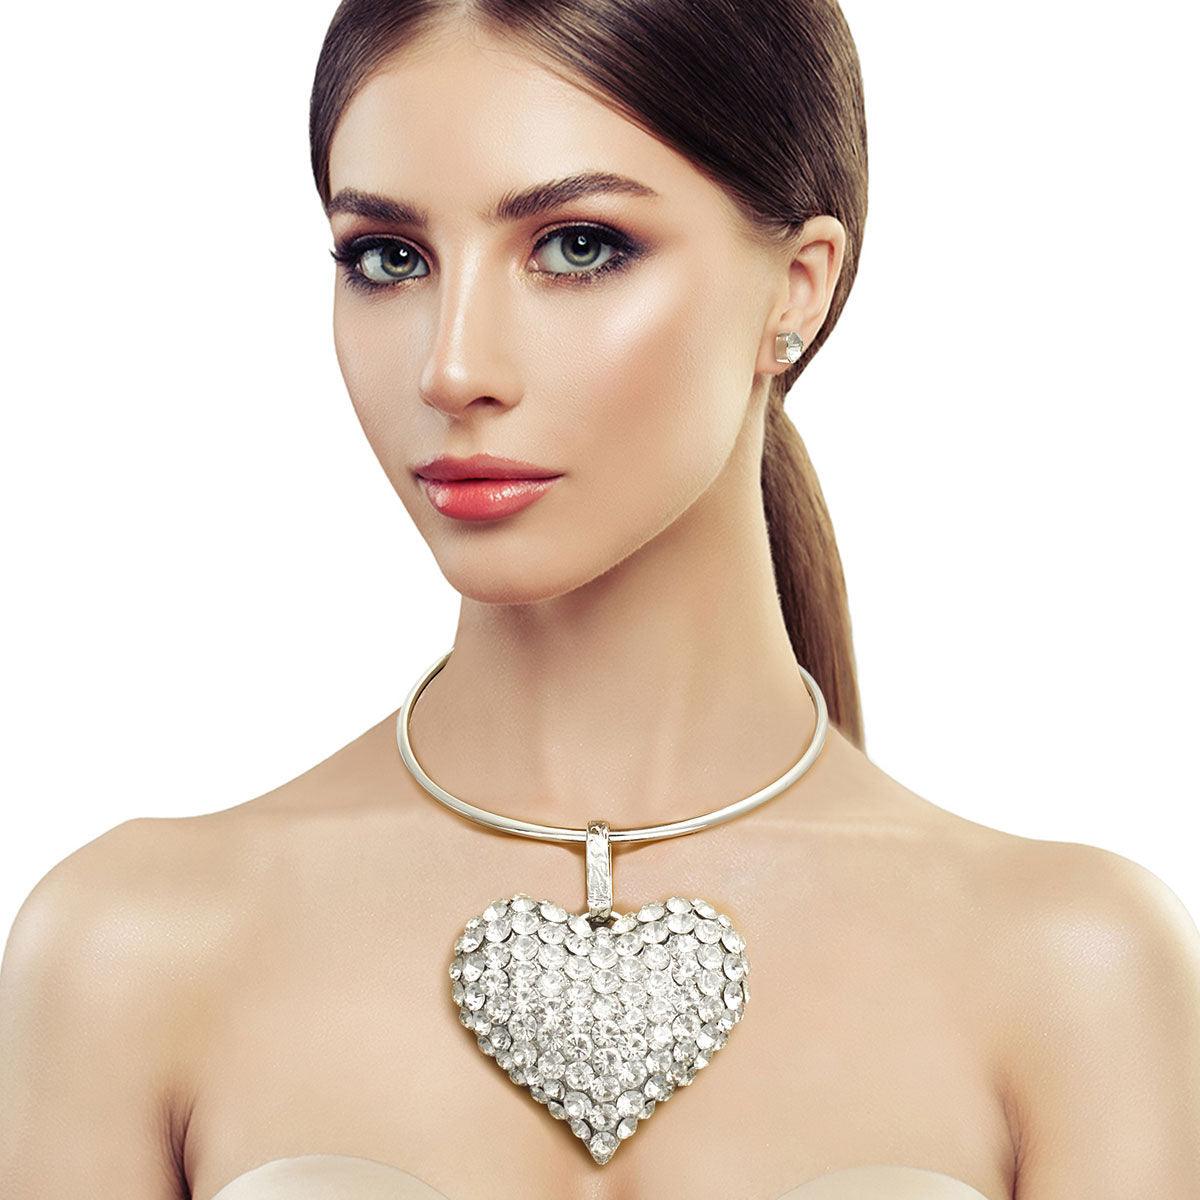 Extra Stunning: Silver-tone Necklace with Rhinestone Heart Set